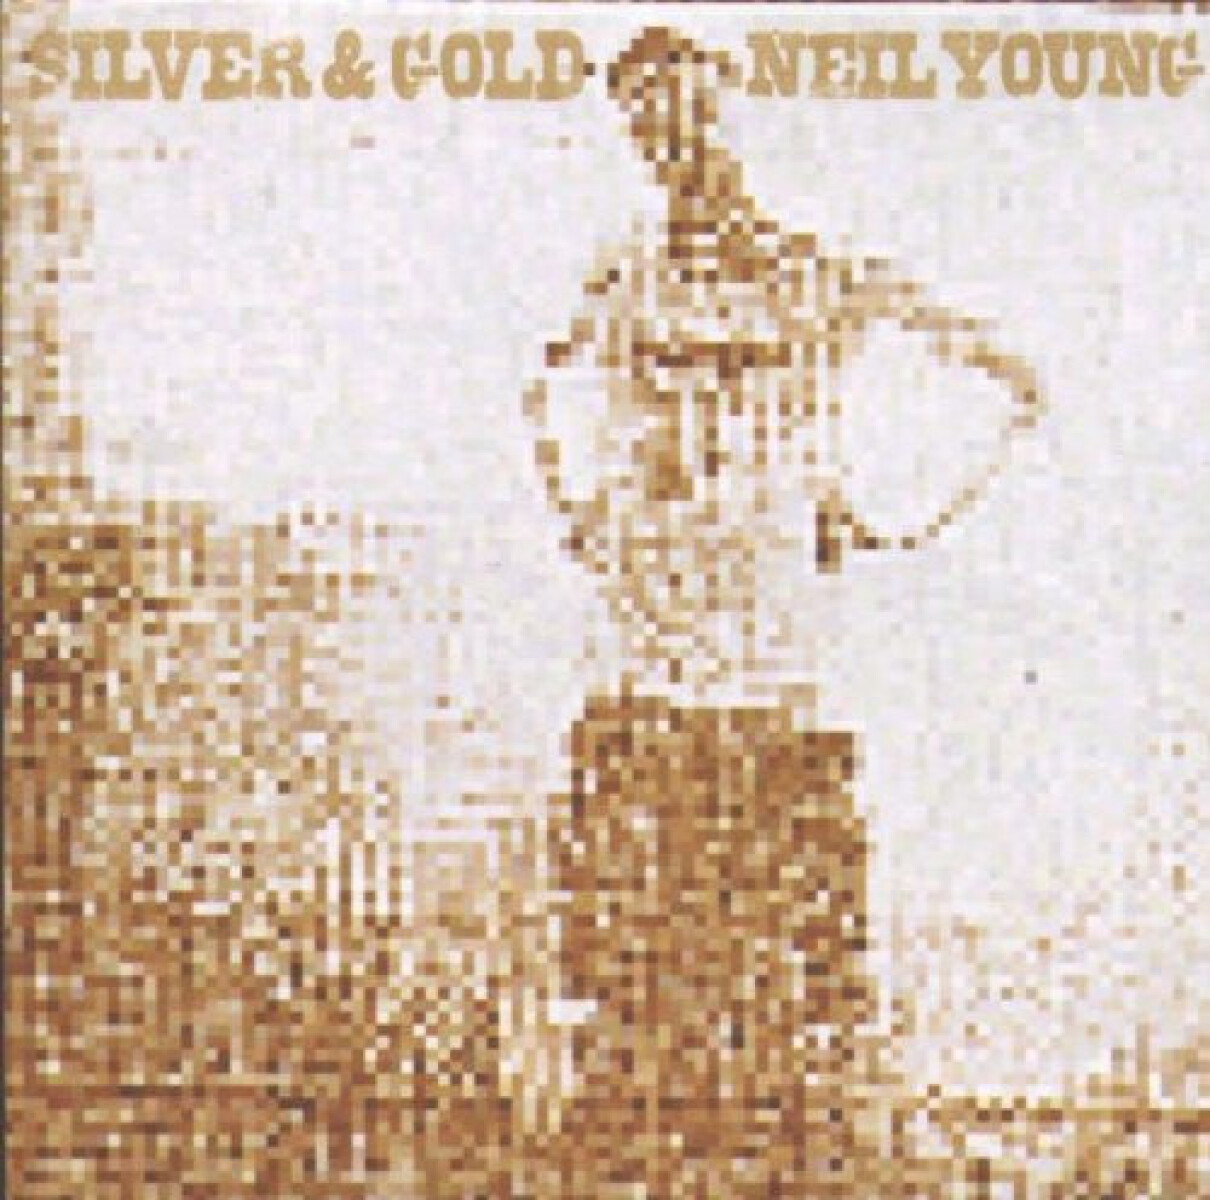 Young Neil-silver & Gold 